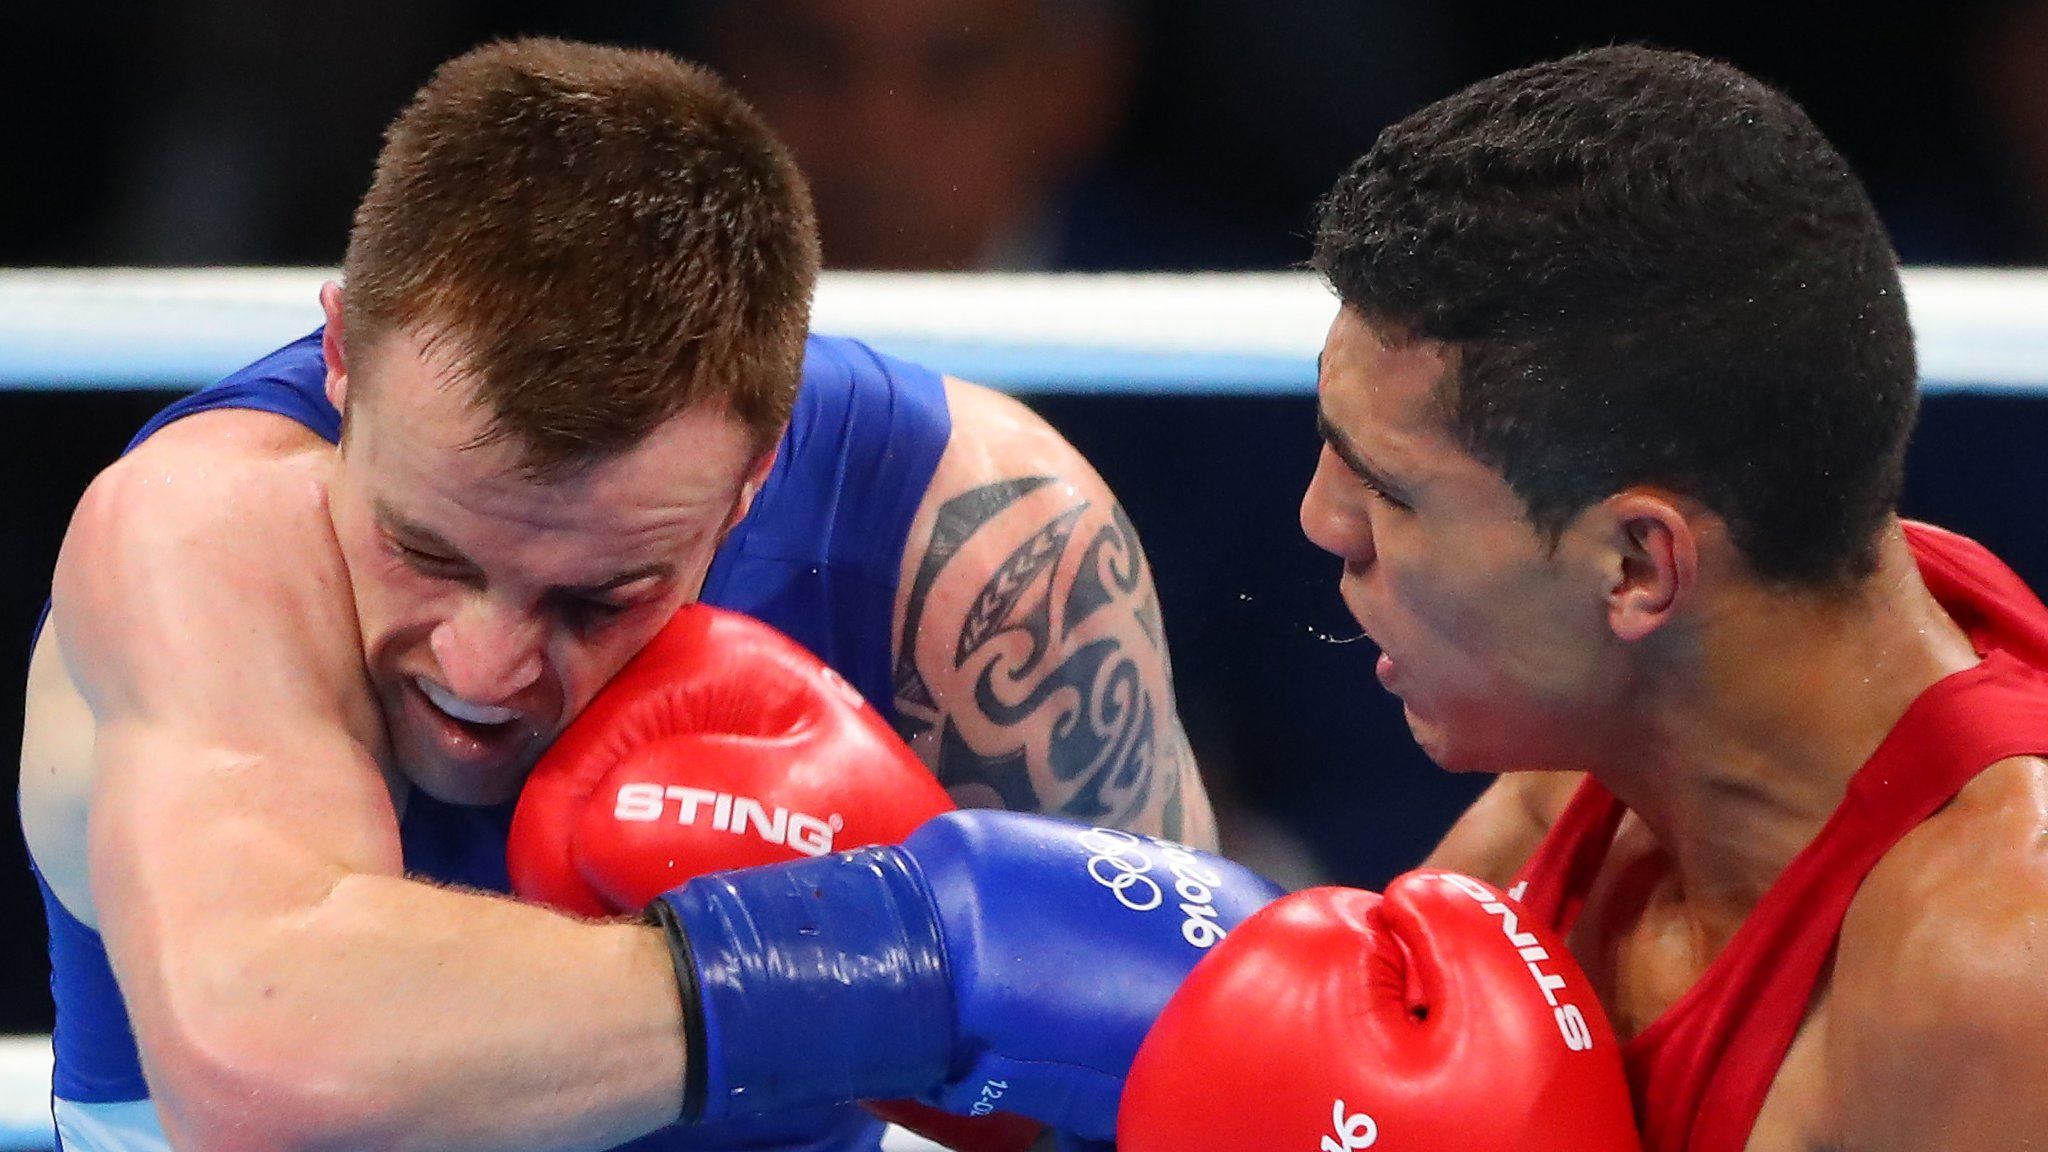 World champion Mohammed Rabii lands a right on Steven Donnelly during the Olympic quarter-final